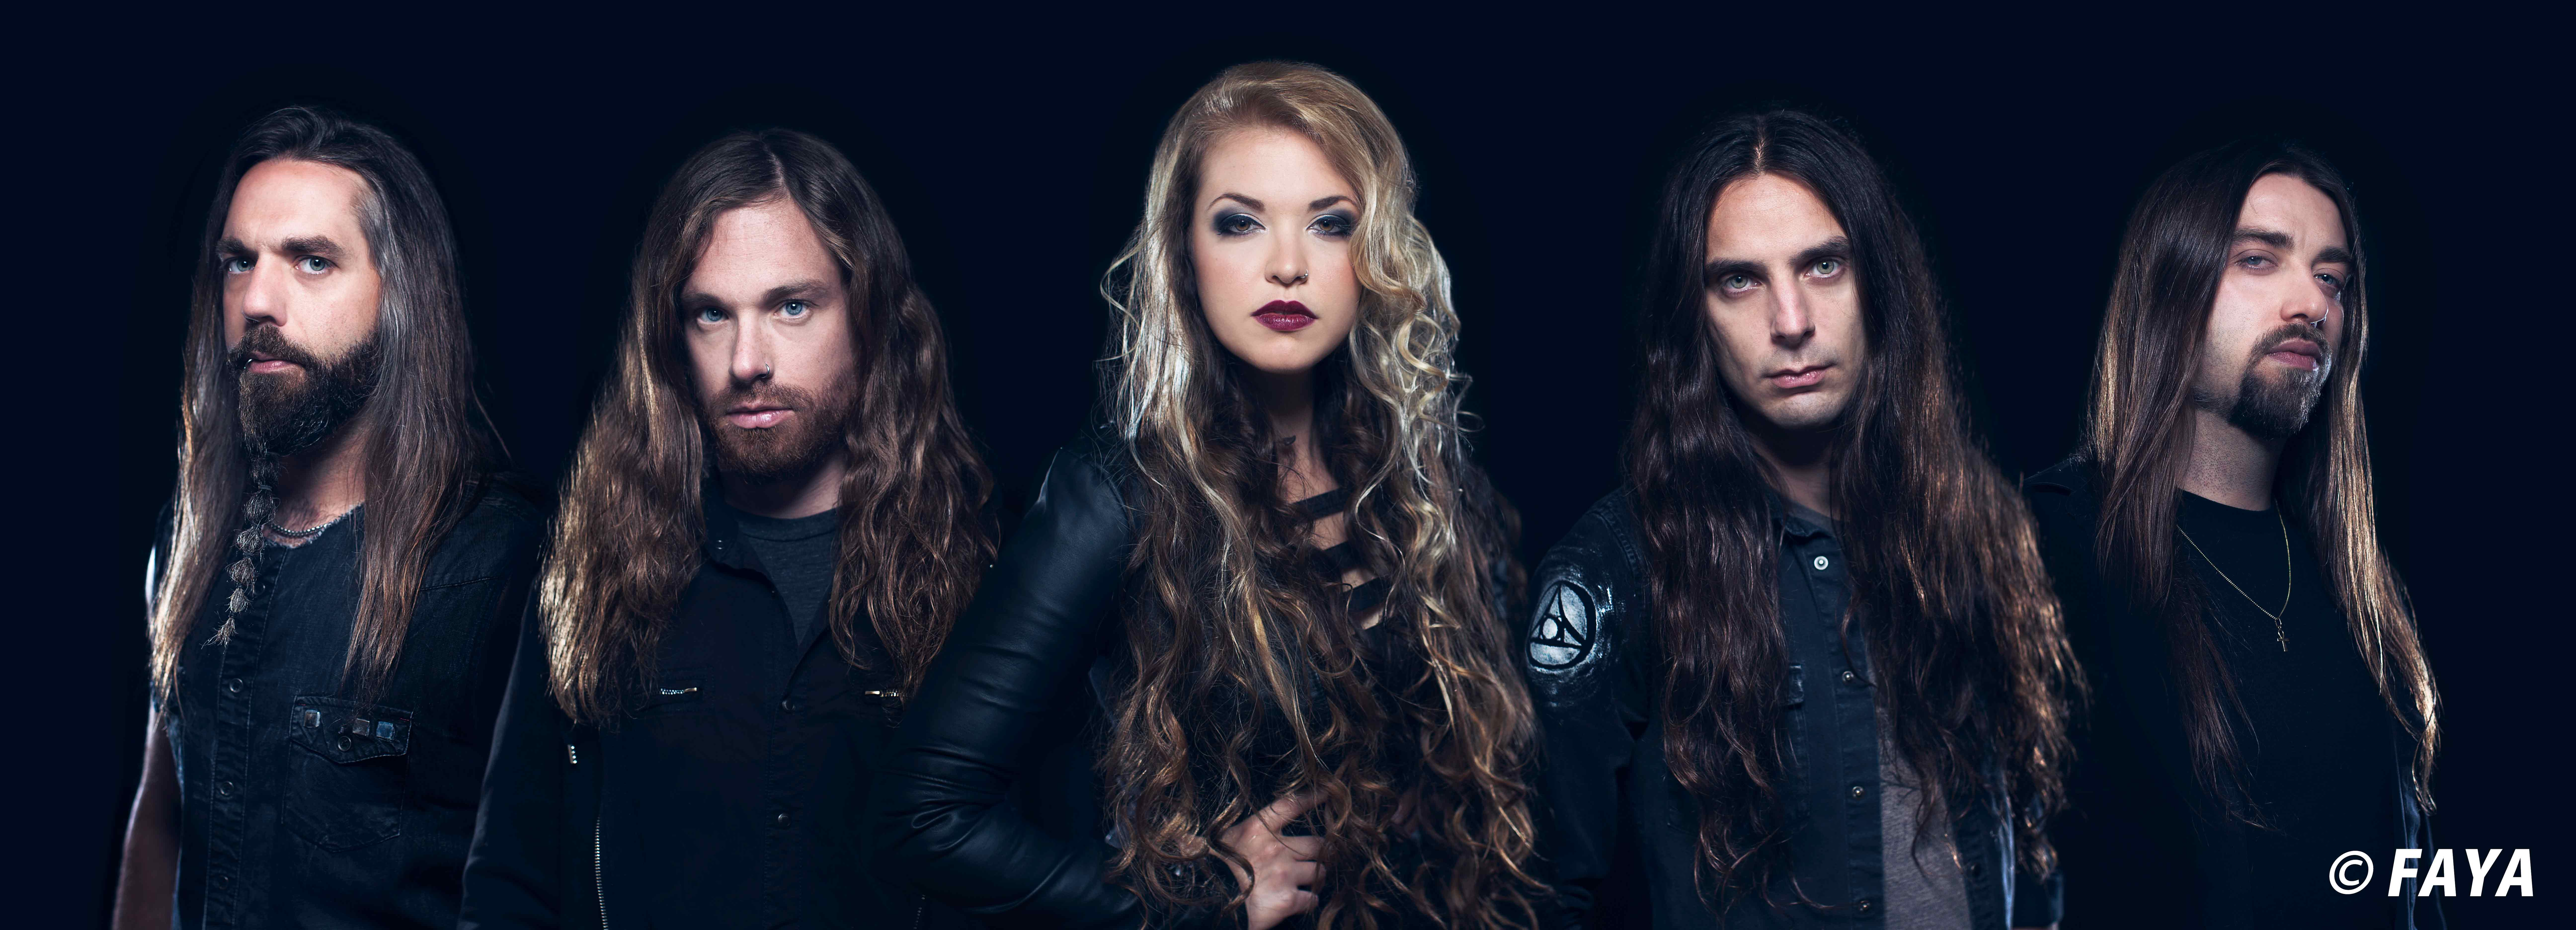 The Agonist photo by FAYA